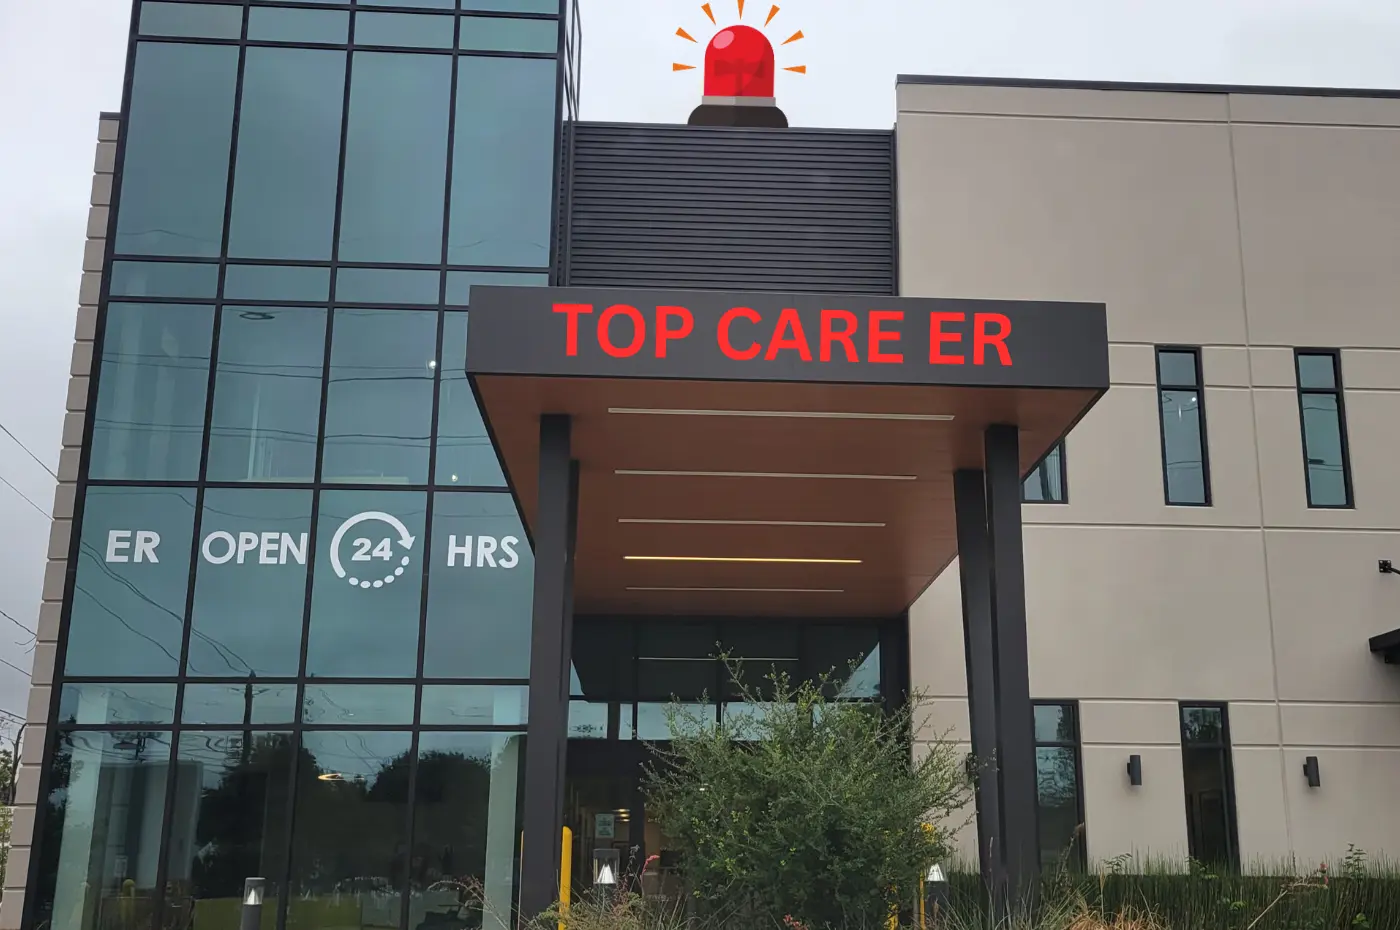 Top Care ER Houston Heights TX from Outside